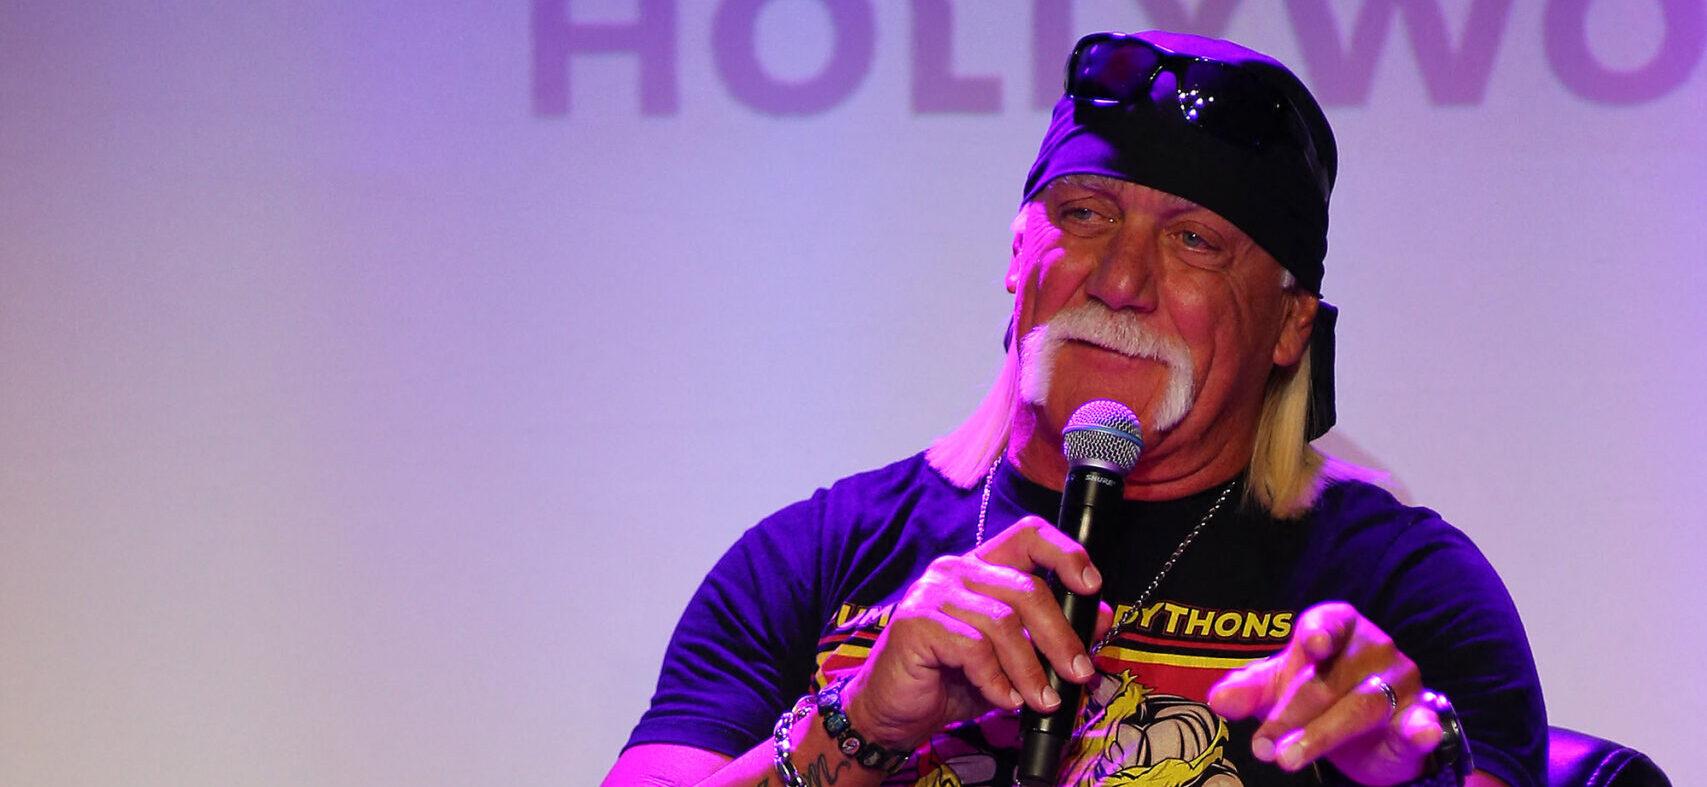 Hulk Hogan Opens Up About 7-Month Sobriety Journey: ‘Much Better To Be Clear-Headed’